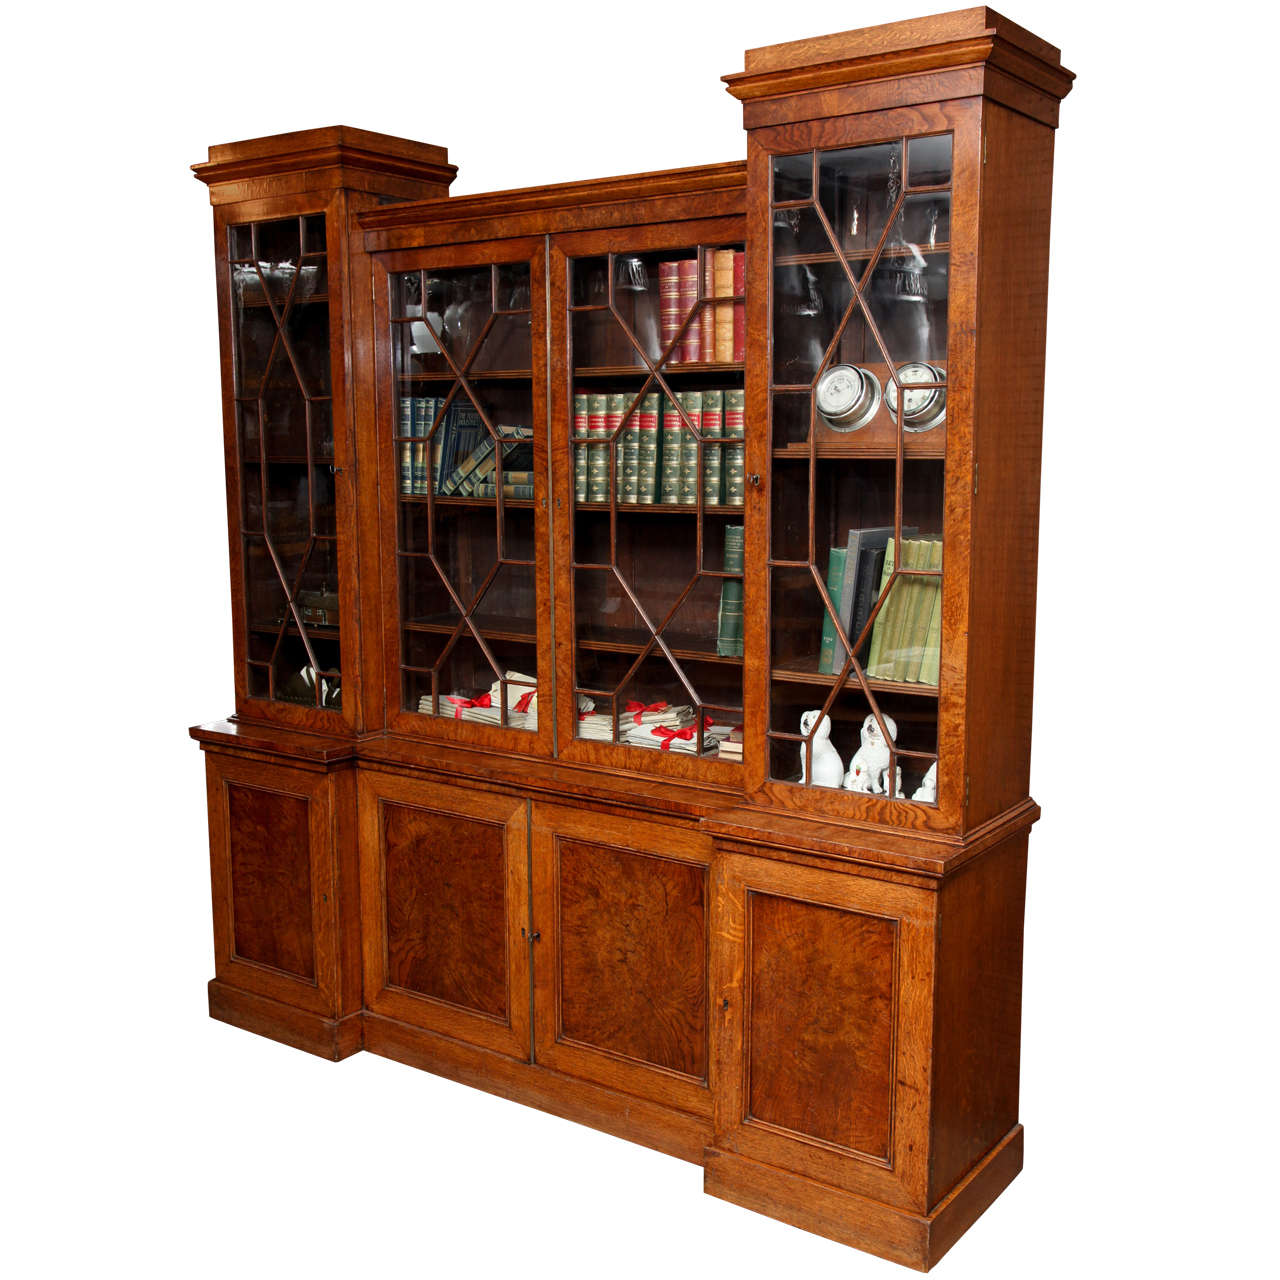 George the IV Bookcase